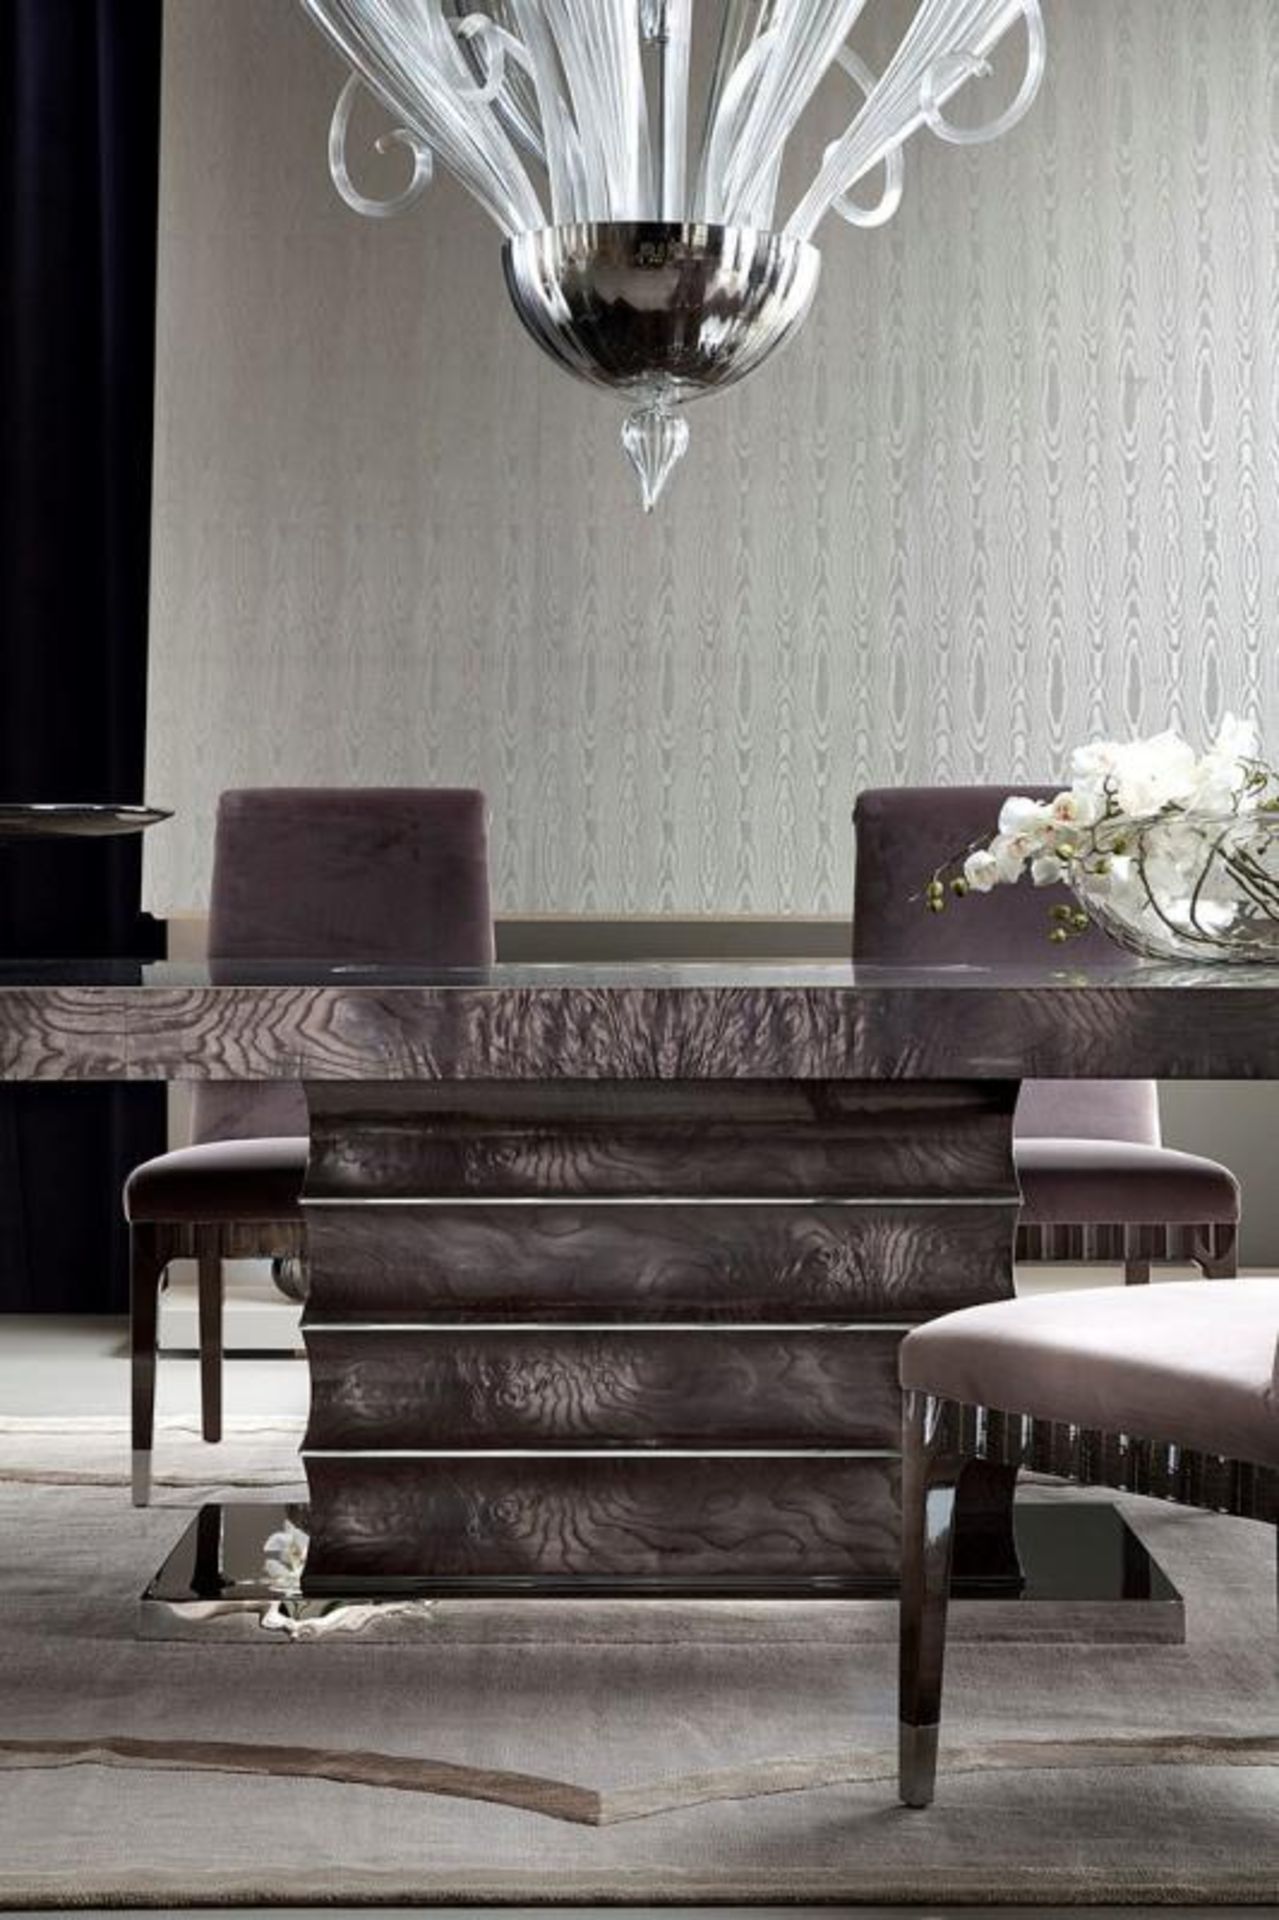 1 x Giorgio Absolute Dining Extension Table 4000 – Mako Japanese Tamos Burl Veneer With a High Gloss - Image 5 of 24